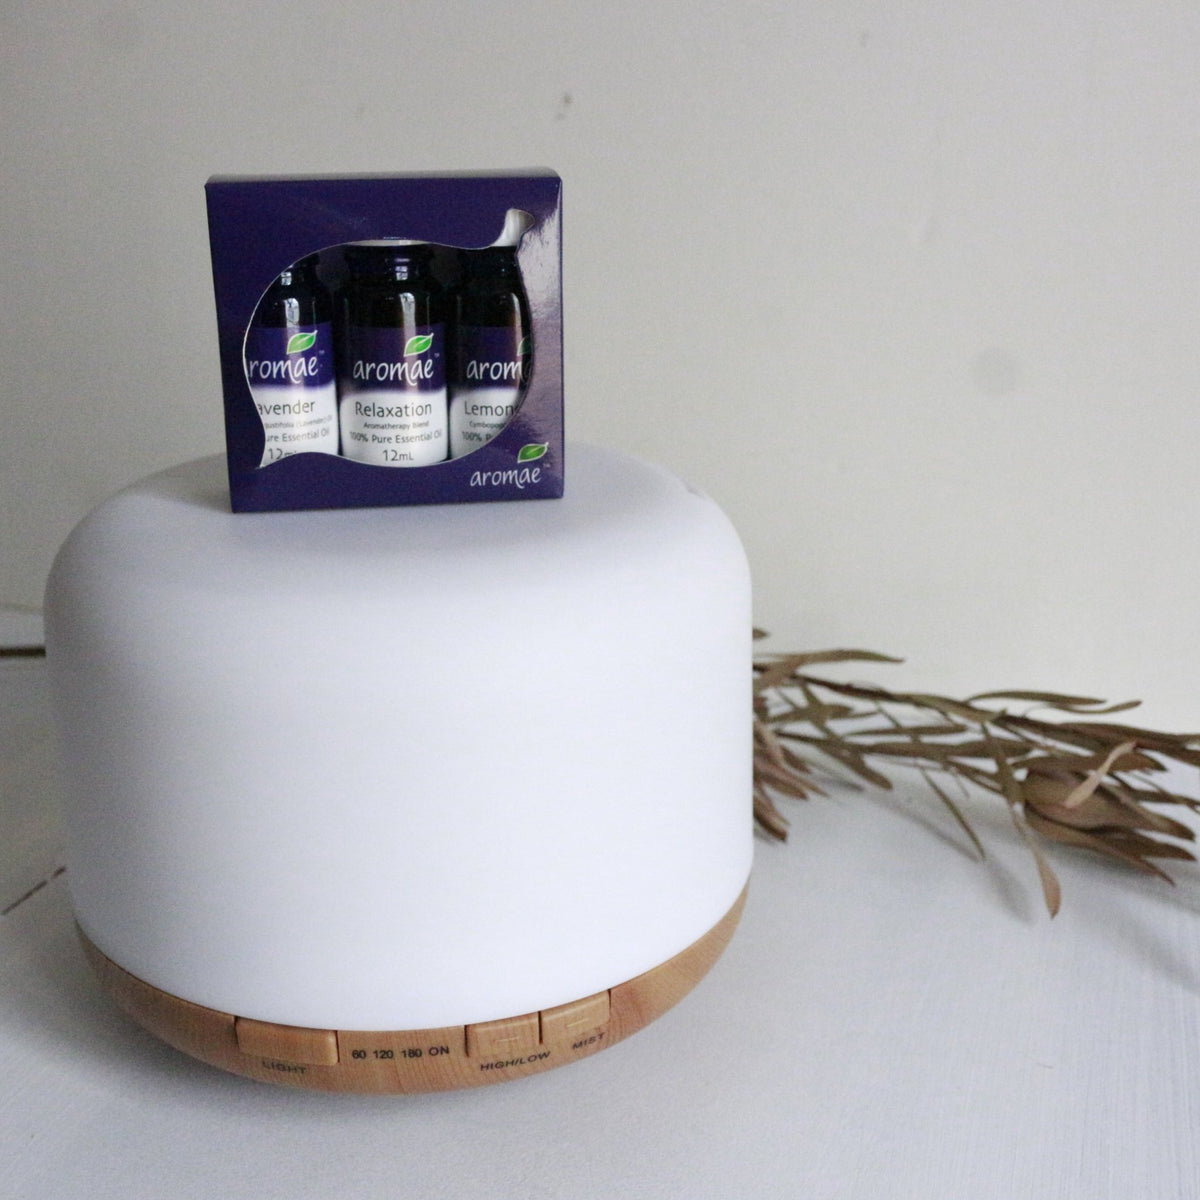 AromaeElectric Diffuser gift set with Relaxation Pack Trio Essential Oils - Aromae #same day gift delivery melbourne#